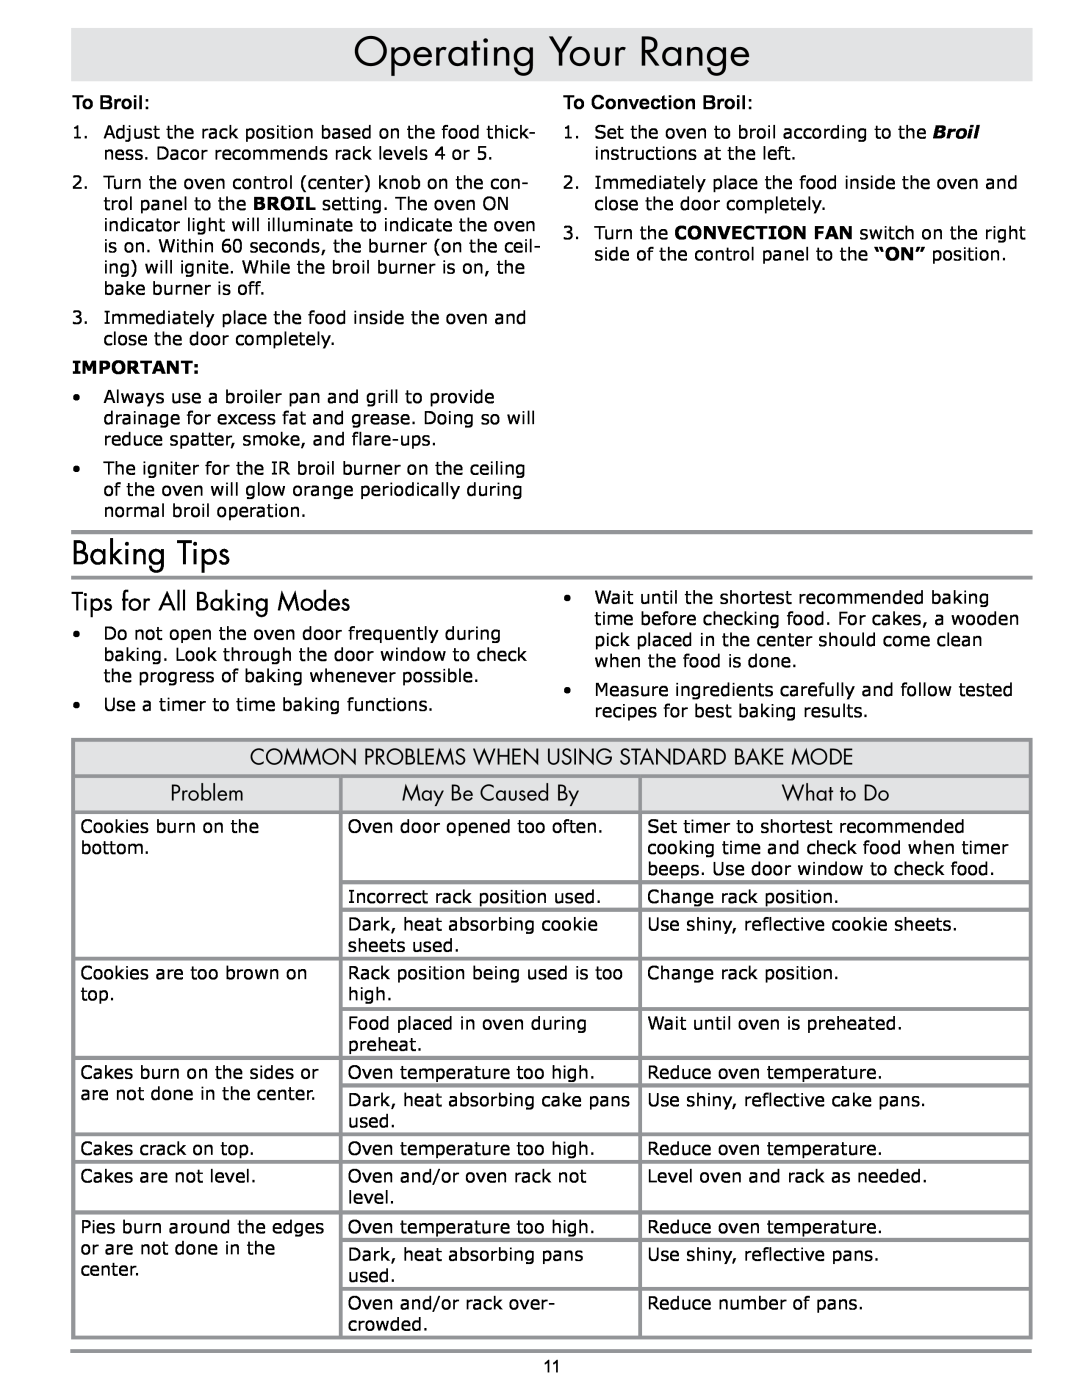 Sears ER30G manual Baking Tips, Tips for All Baking Modes, Common Problems When Using Standard Bake Mode, May Be Caused By 